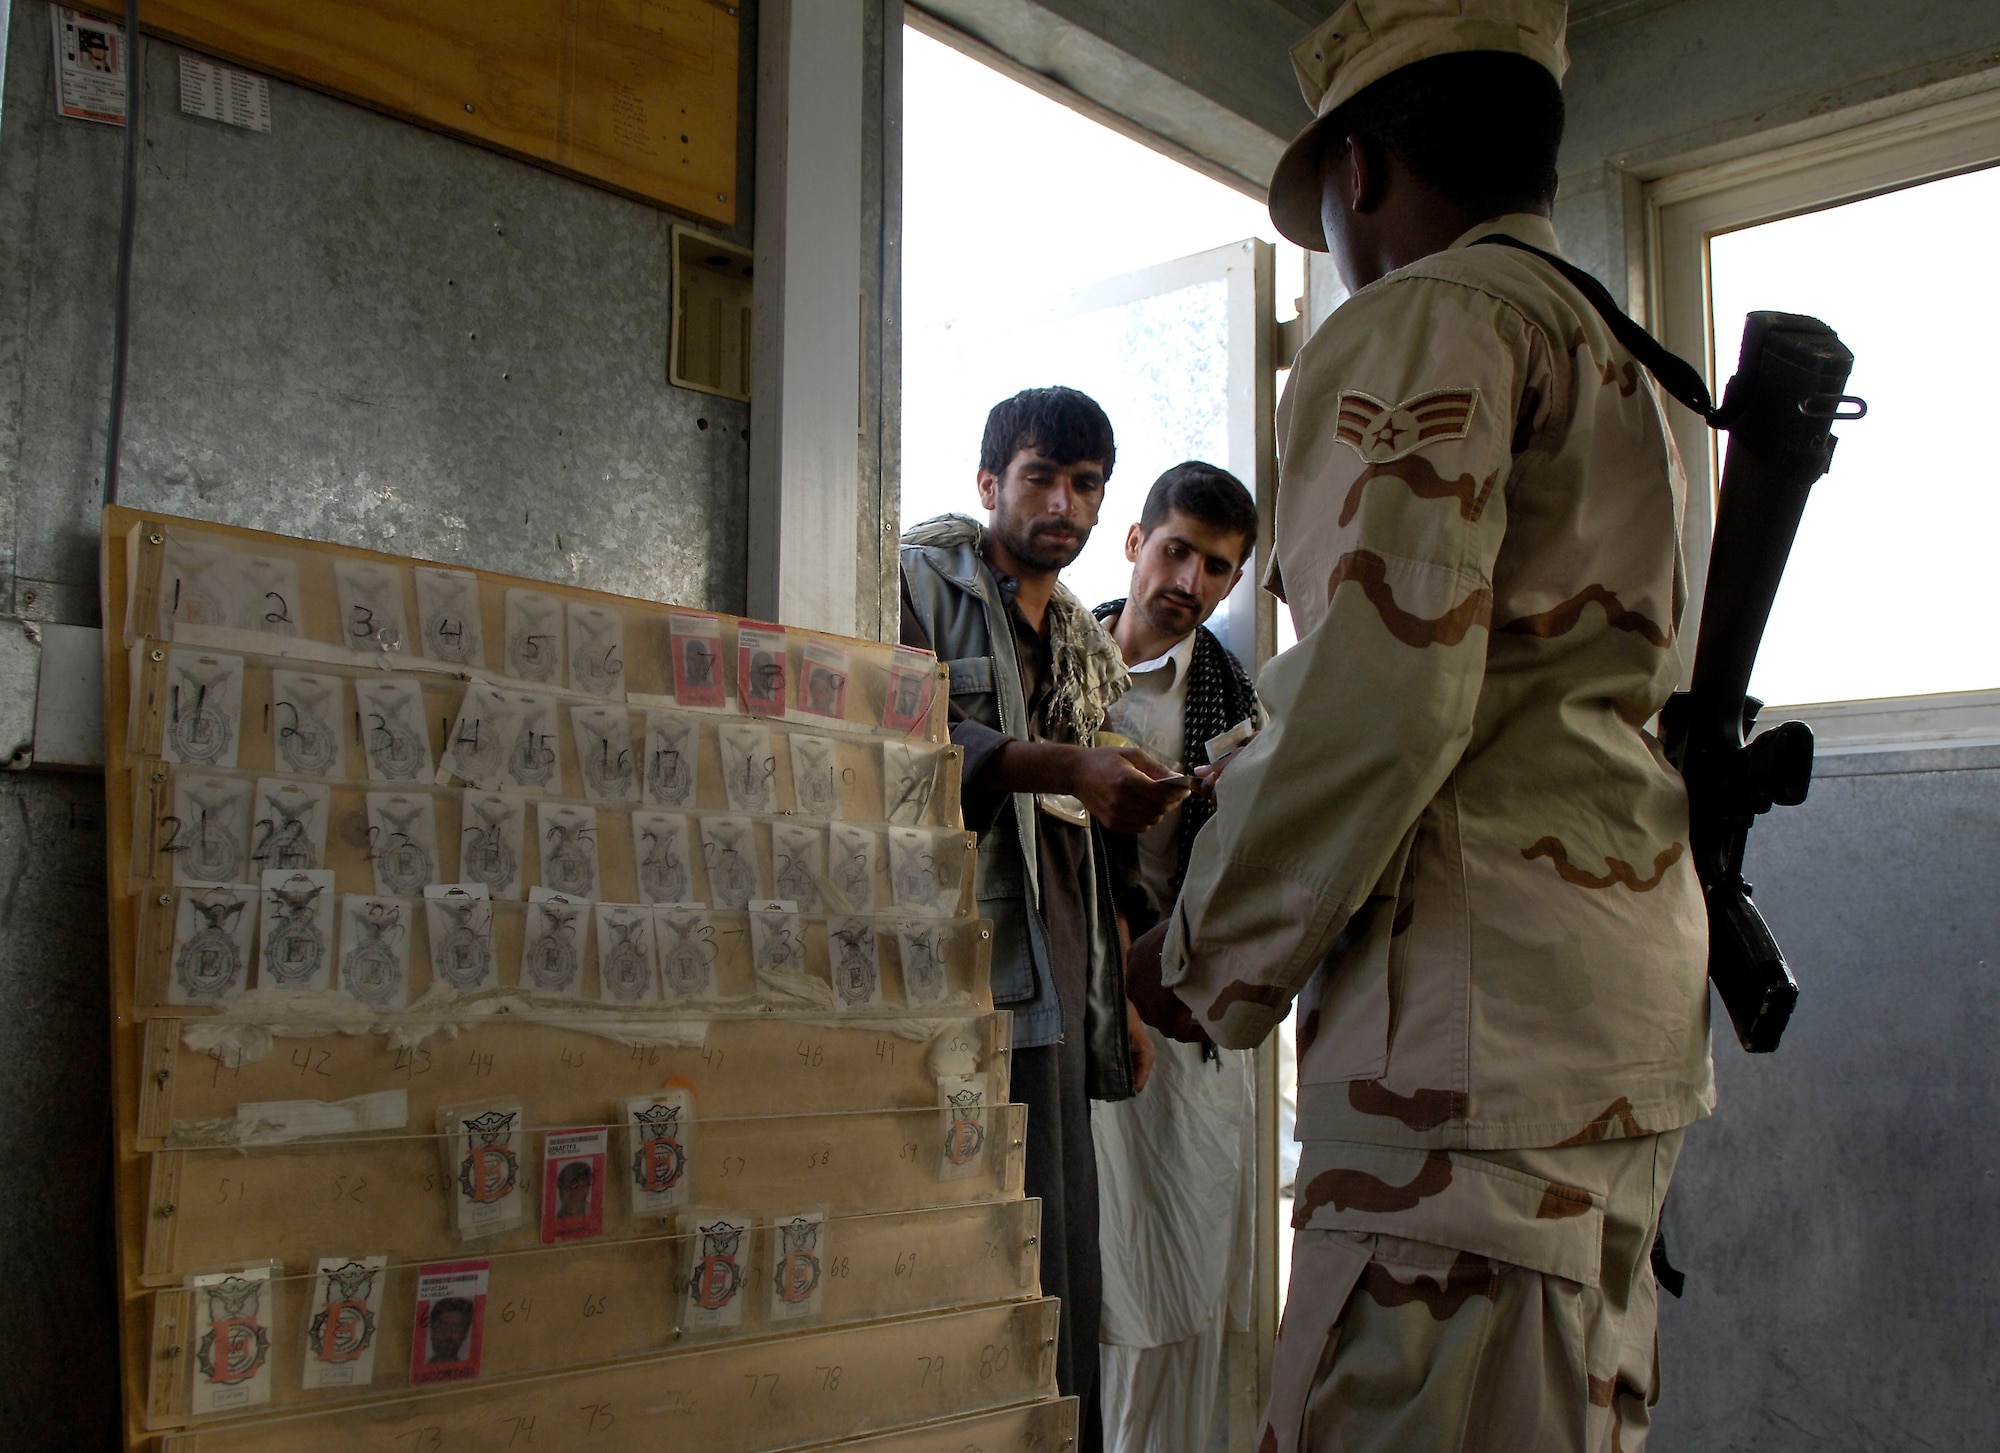 Senior Airman Raymond King takes a badge from a local national working on Bagram Air Base, Afghanistan, Aug 24, 2006.  The workers are employed by a contractor on the base and are escorted by Airmen while on the job.  The badges ensure each worker is accounted for.  Airman King is a force protection escort deployed from Dover Air Force Base, Del. (U.S. Air Force photo/Senior Airman Brian Ferguson)
